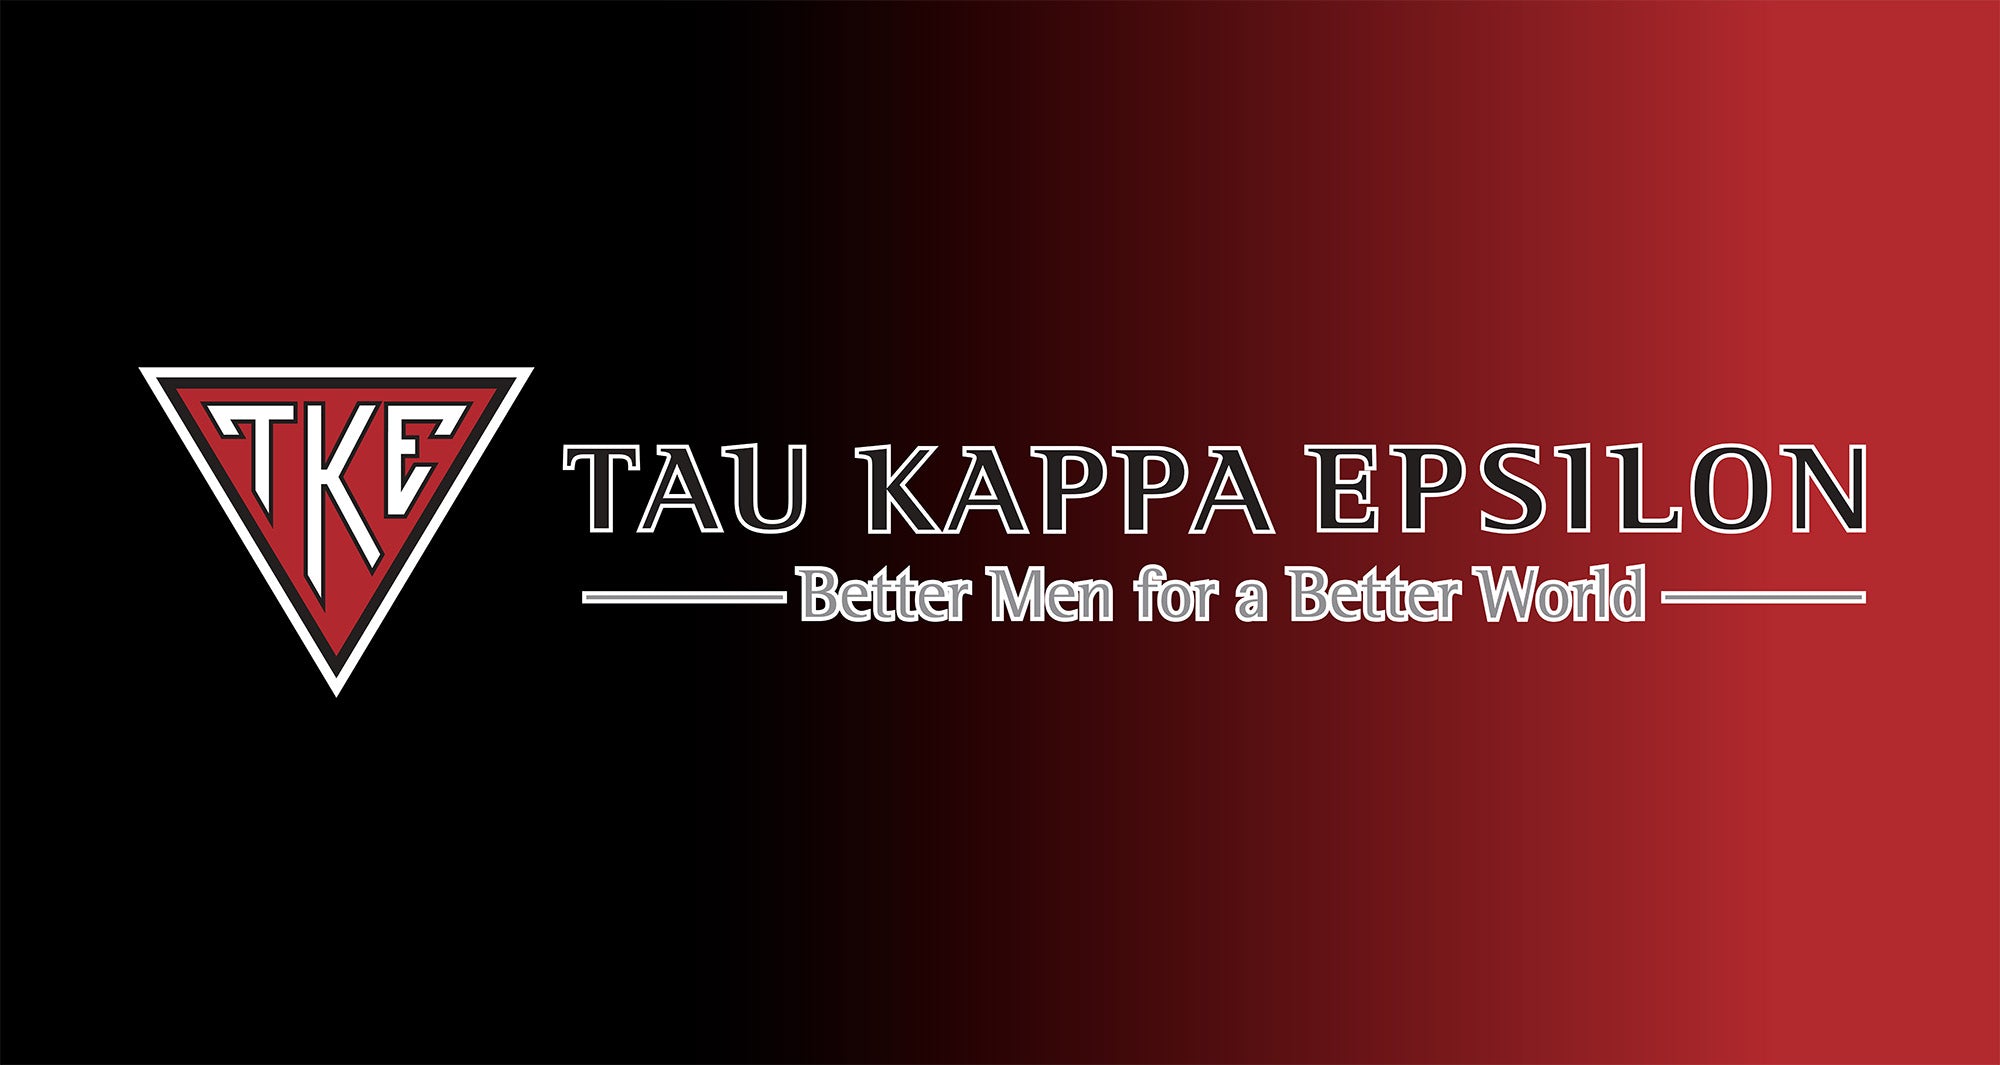 Tau Kappa Epsilon home page banner image with their logo on a red to black gradient background. 